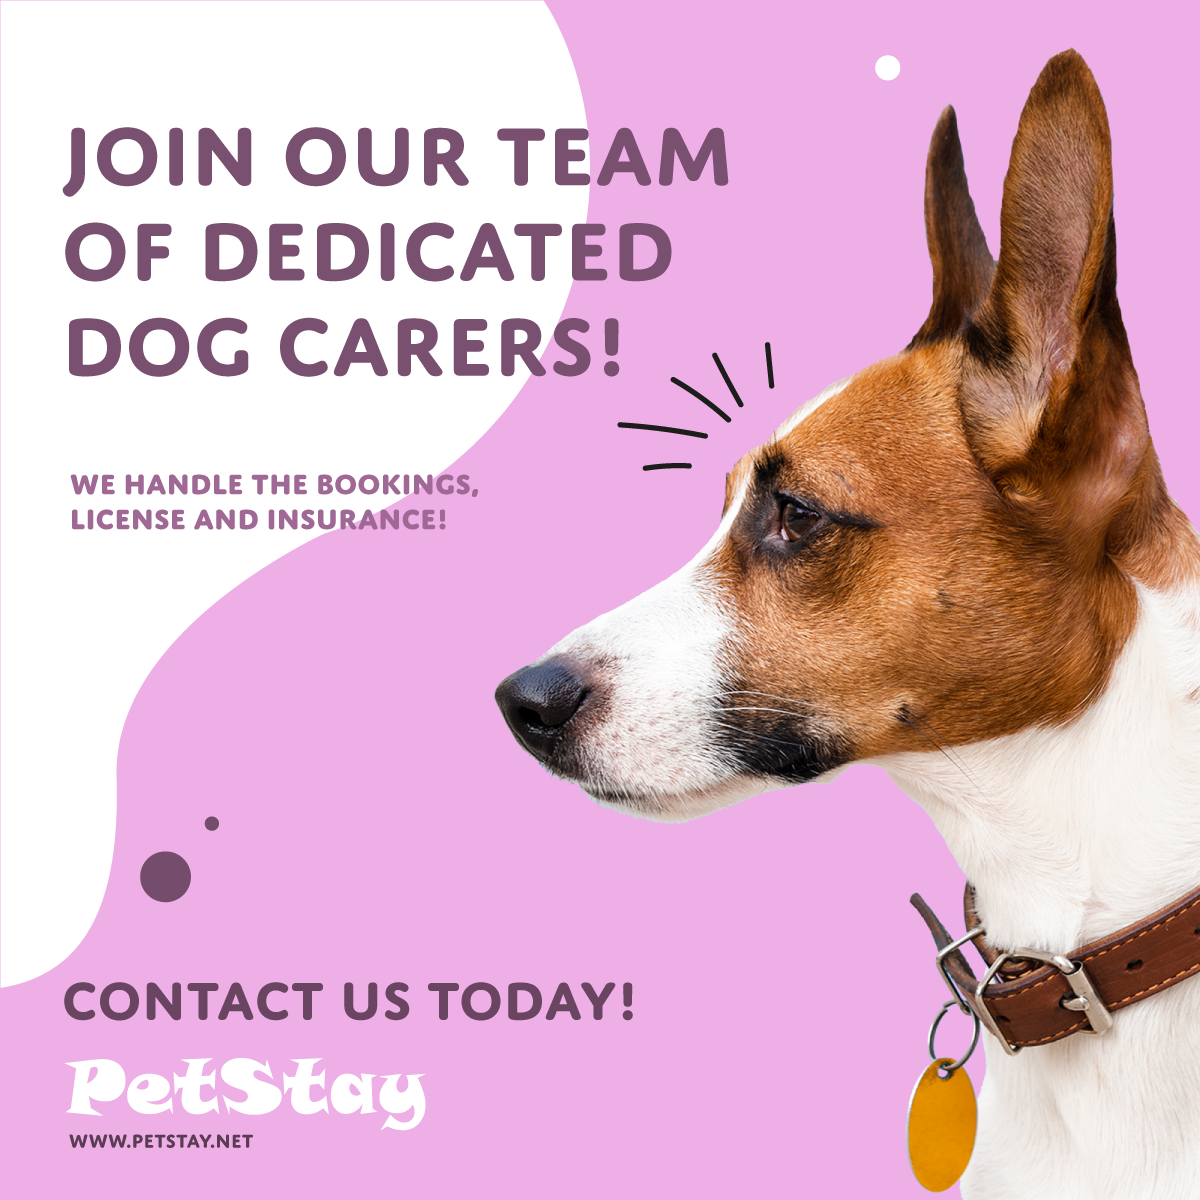 Become a PetStay dog carer and look after dogs in your own home.